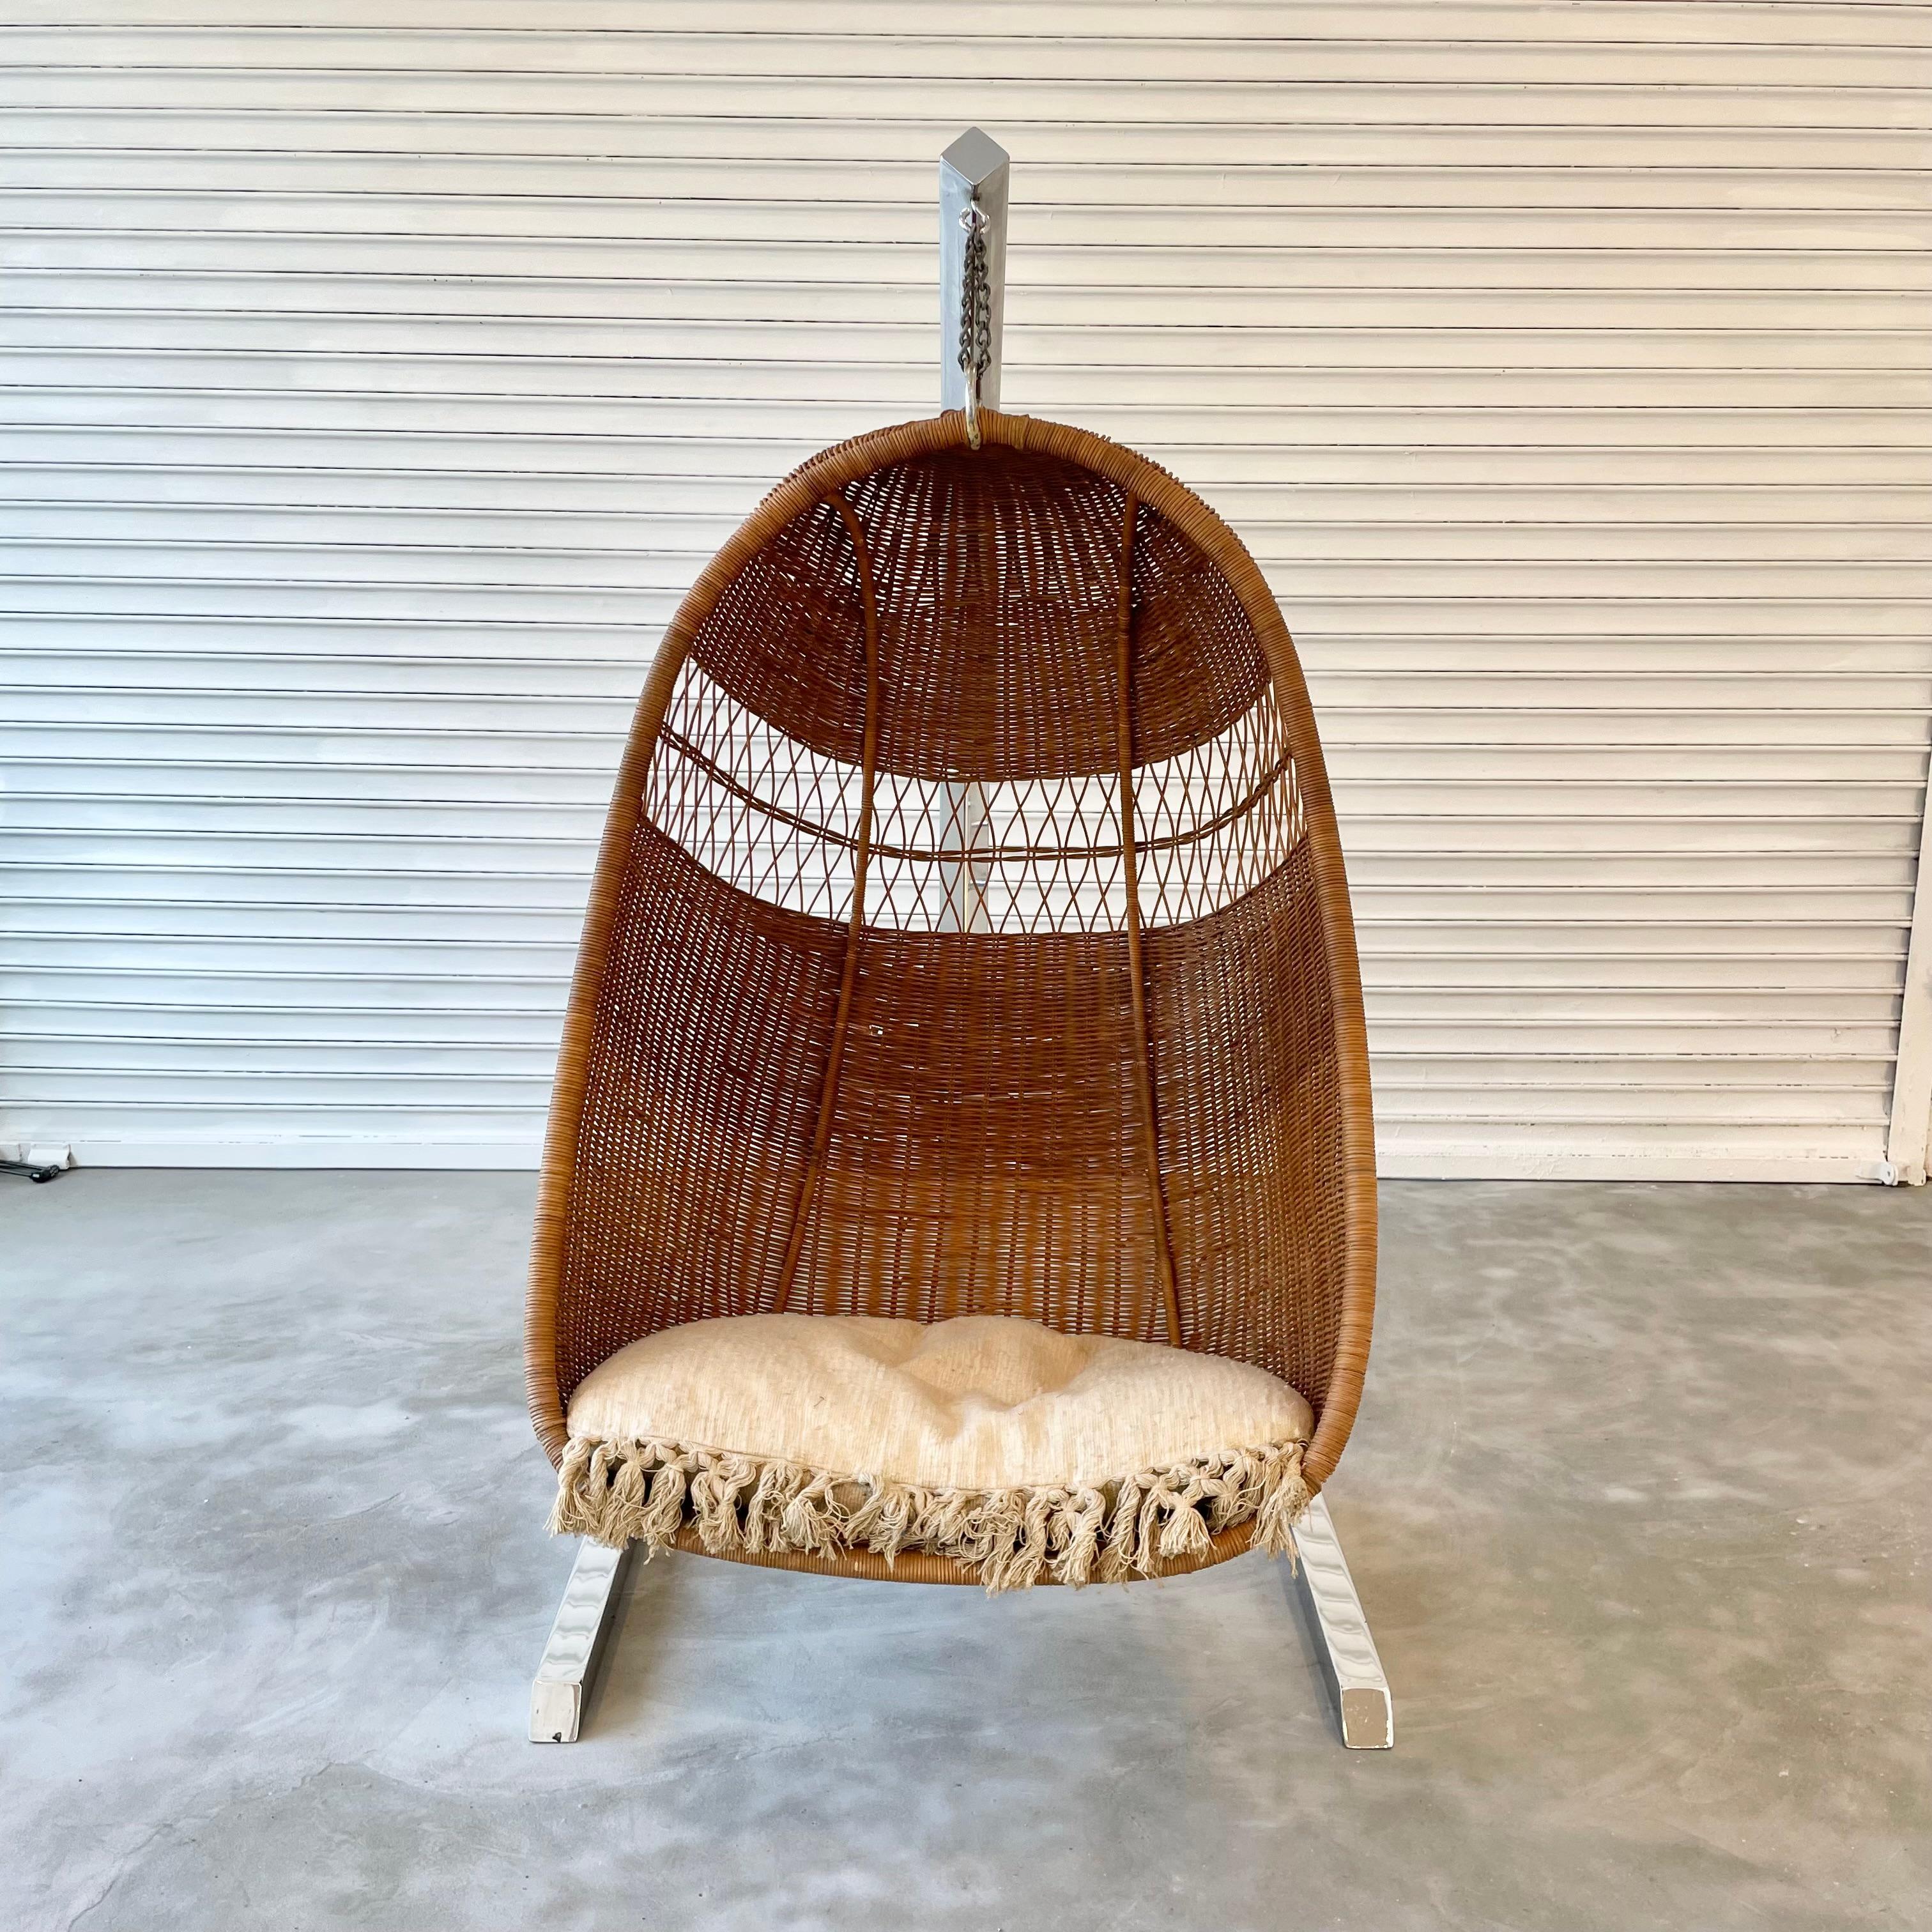 Rare sculptural rattan and wicker hanging chair. Hanging from an angular chrome stand. Stunning design. Great scale. Multiple window cut-outs to see through chair. Perfect indoors or outside in a covered deck. Suspended by heavy duty chain.